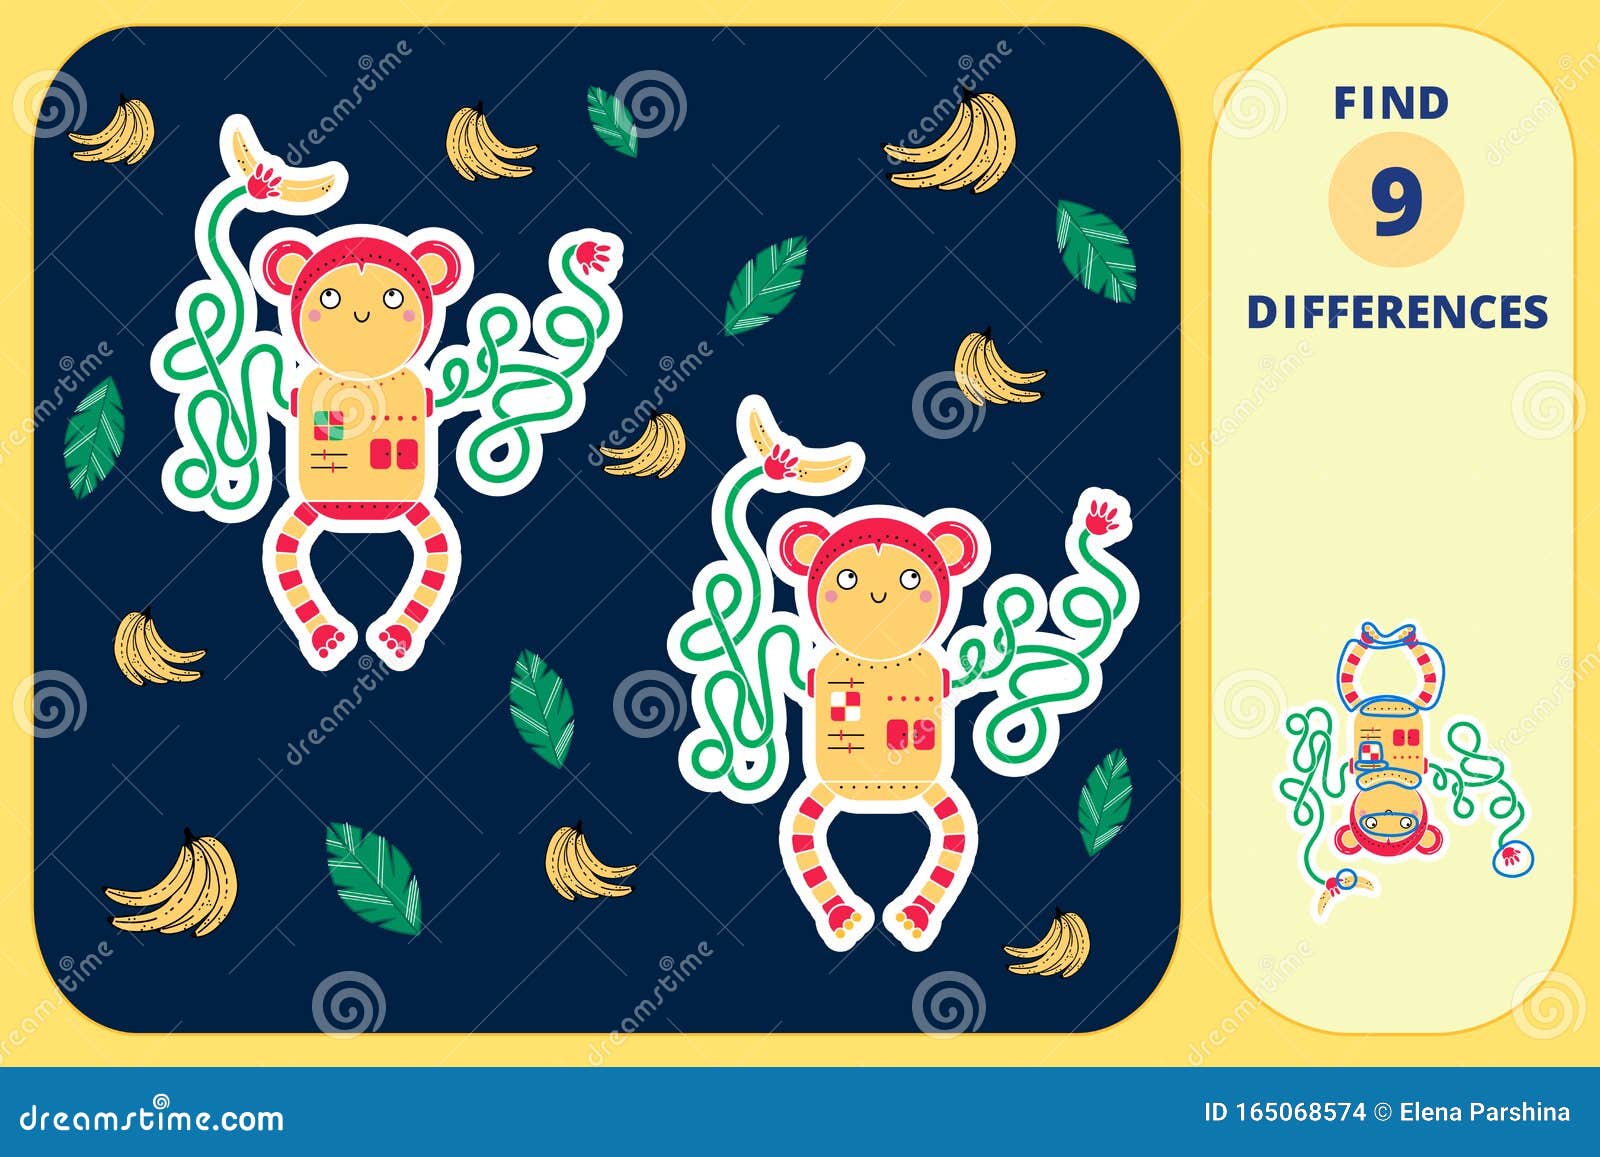 difference-game-coloring-page-vector-illustration-cartoondealer